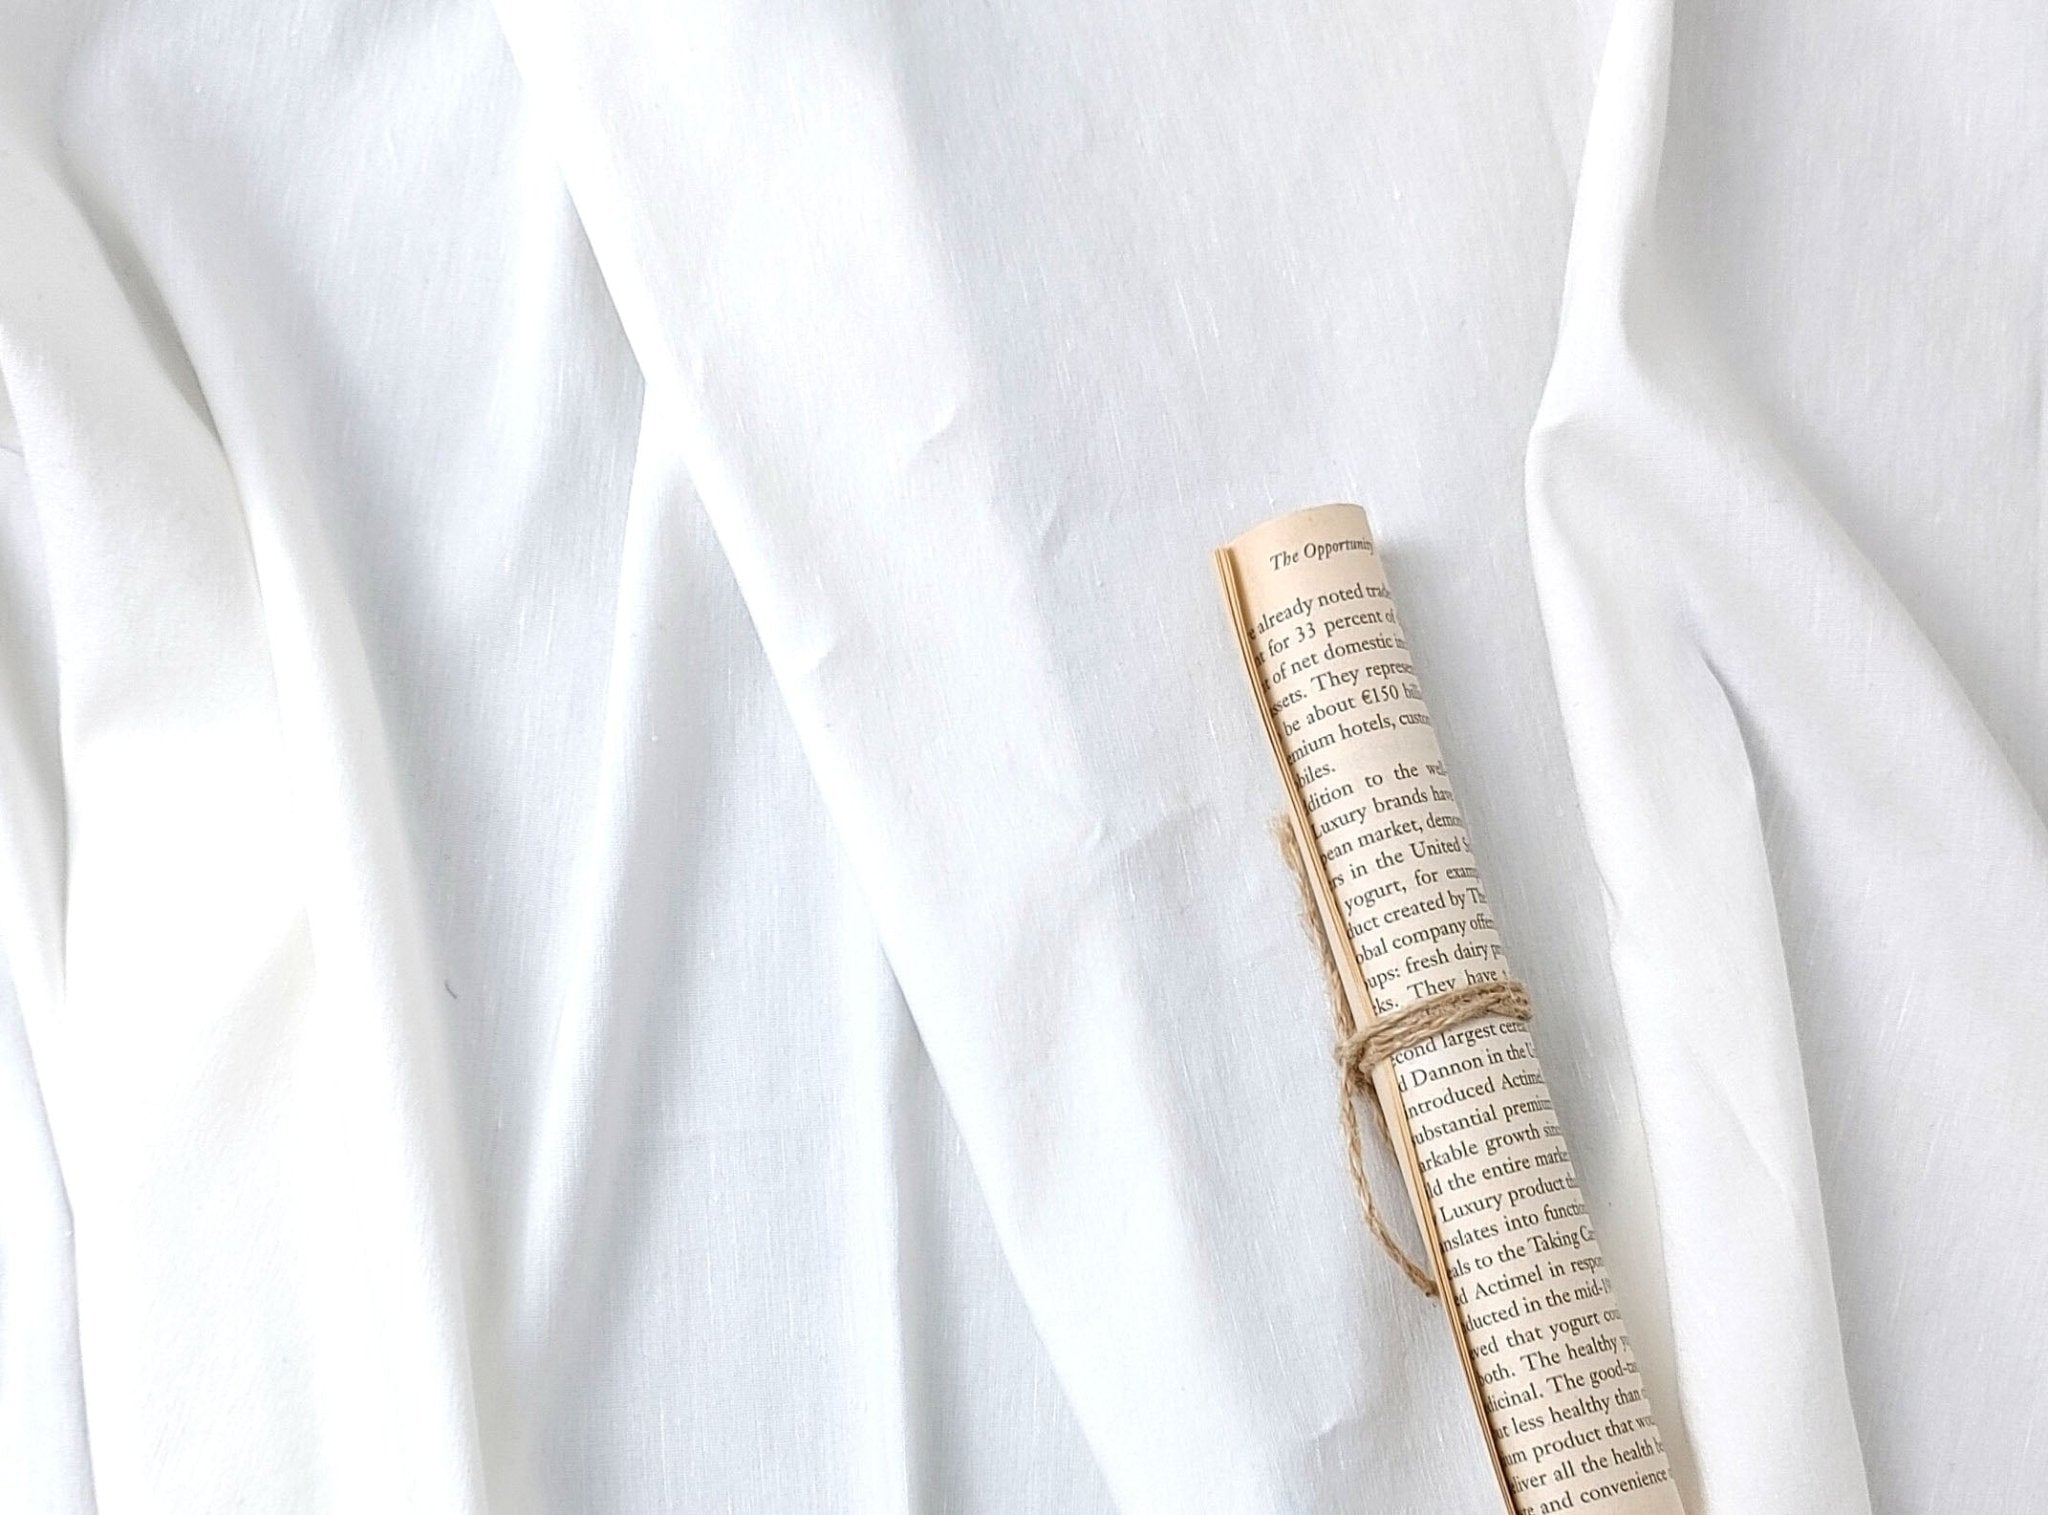 Donna Linen - High Density Linen Rayon Stretch Fabric 4025 4024 5982 4803 4579 4578 4023 3978 - The Linen Lab - White